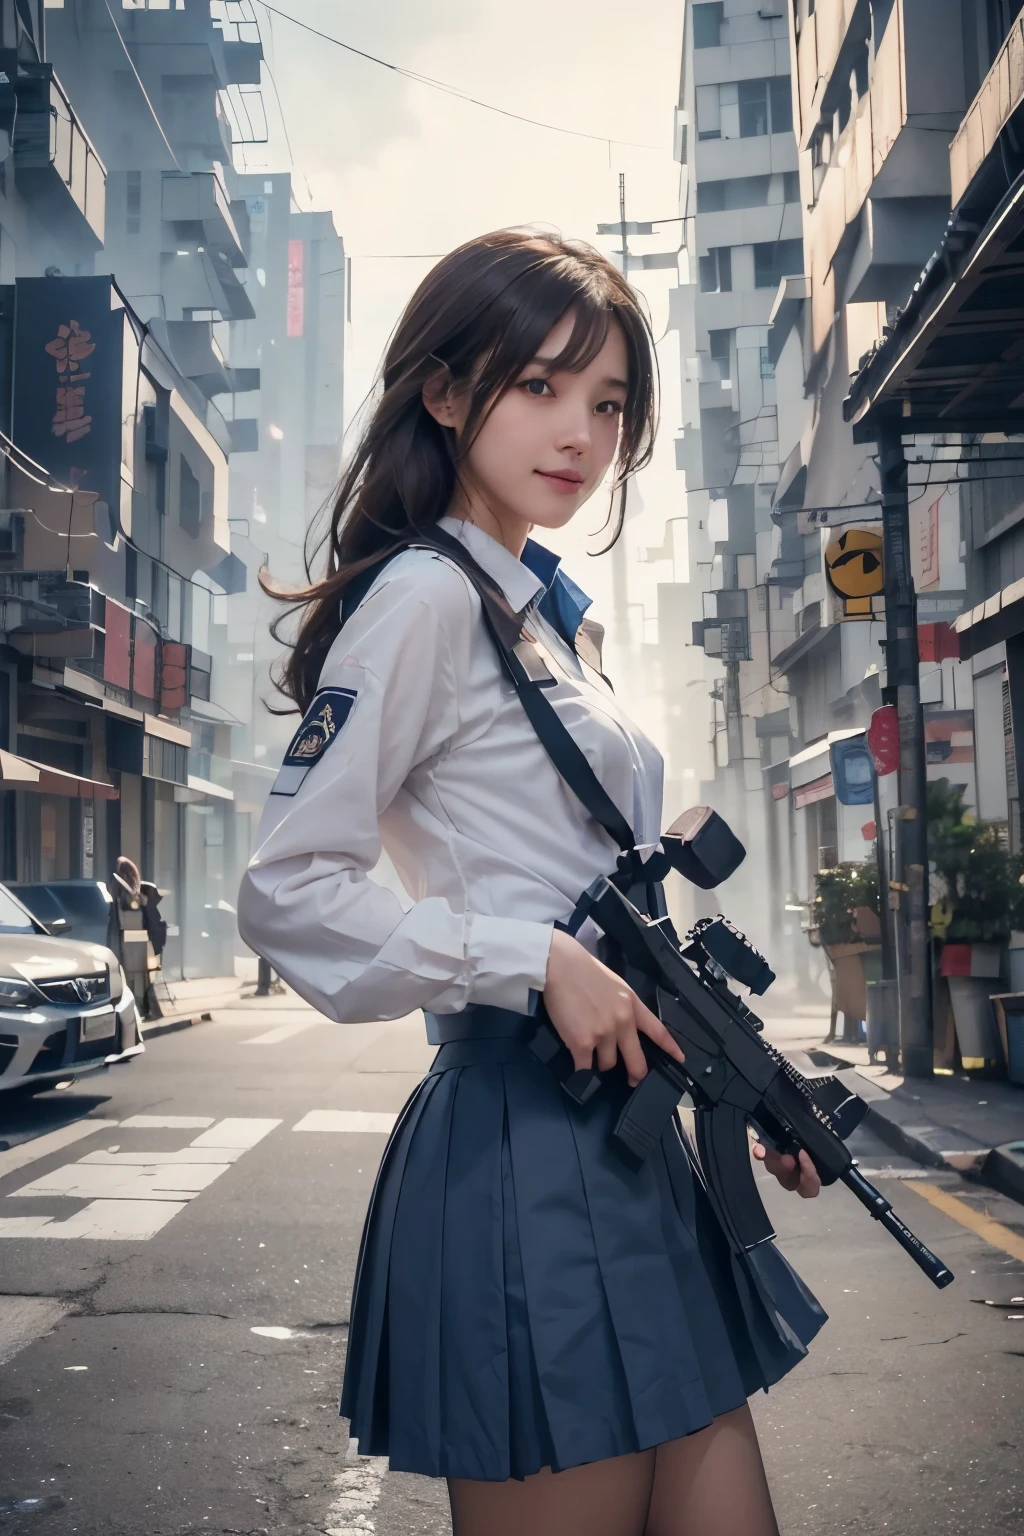 ({Very Aesthetic}, {Very Detailed}, {Very Real}, ,1 Cute Girl, from front, brown hair, semiLong Hair, Handsome Face, Delicate Eyes, (school uniform),Delicate Body, smile, (blue skirt),Hold a machine gun, Battlefield city with smoke rising,sensei,tooimage, cyberpunk, futuristic city